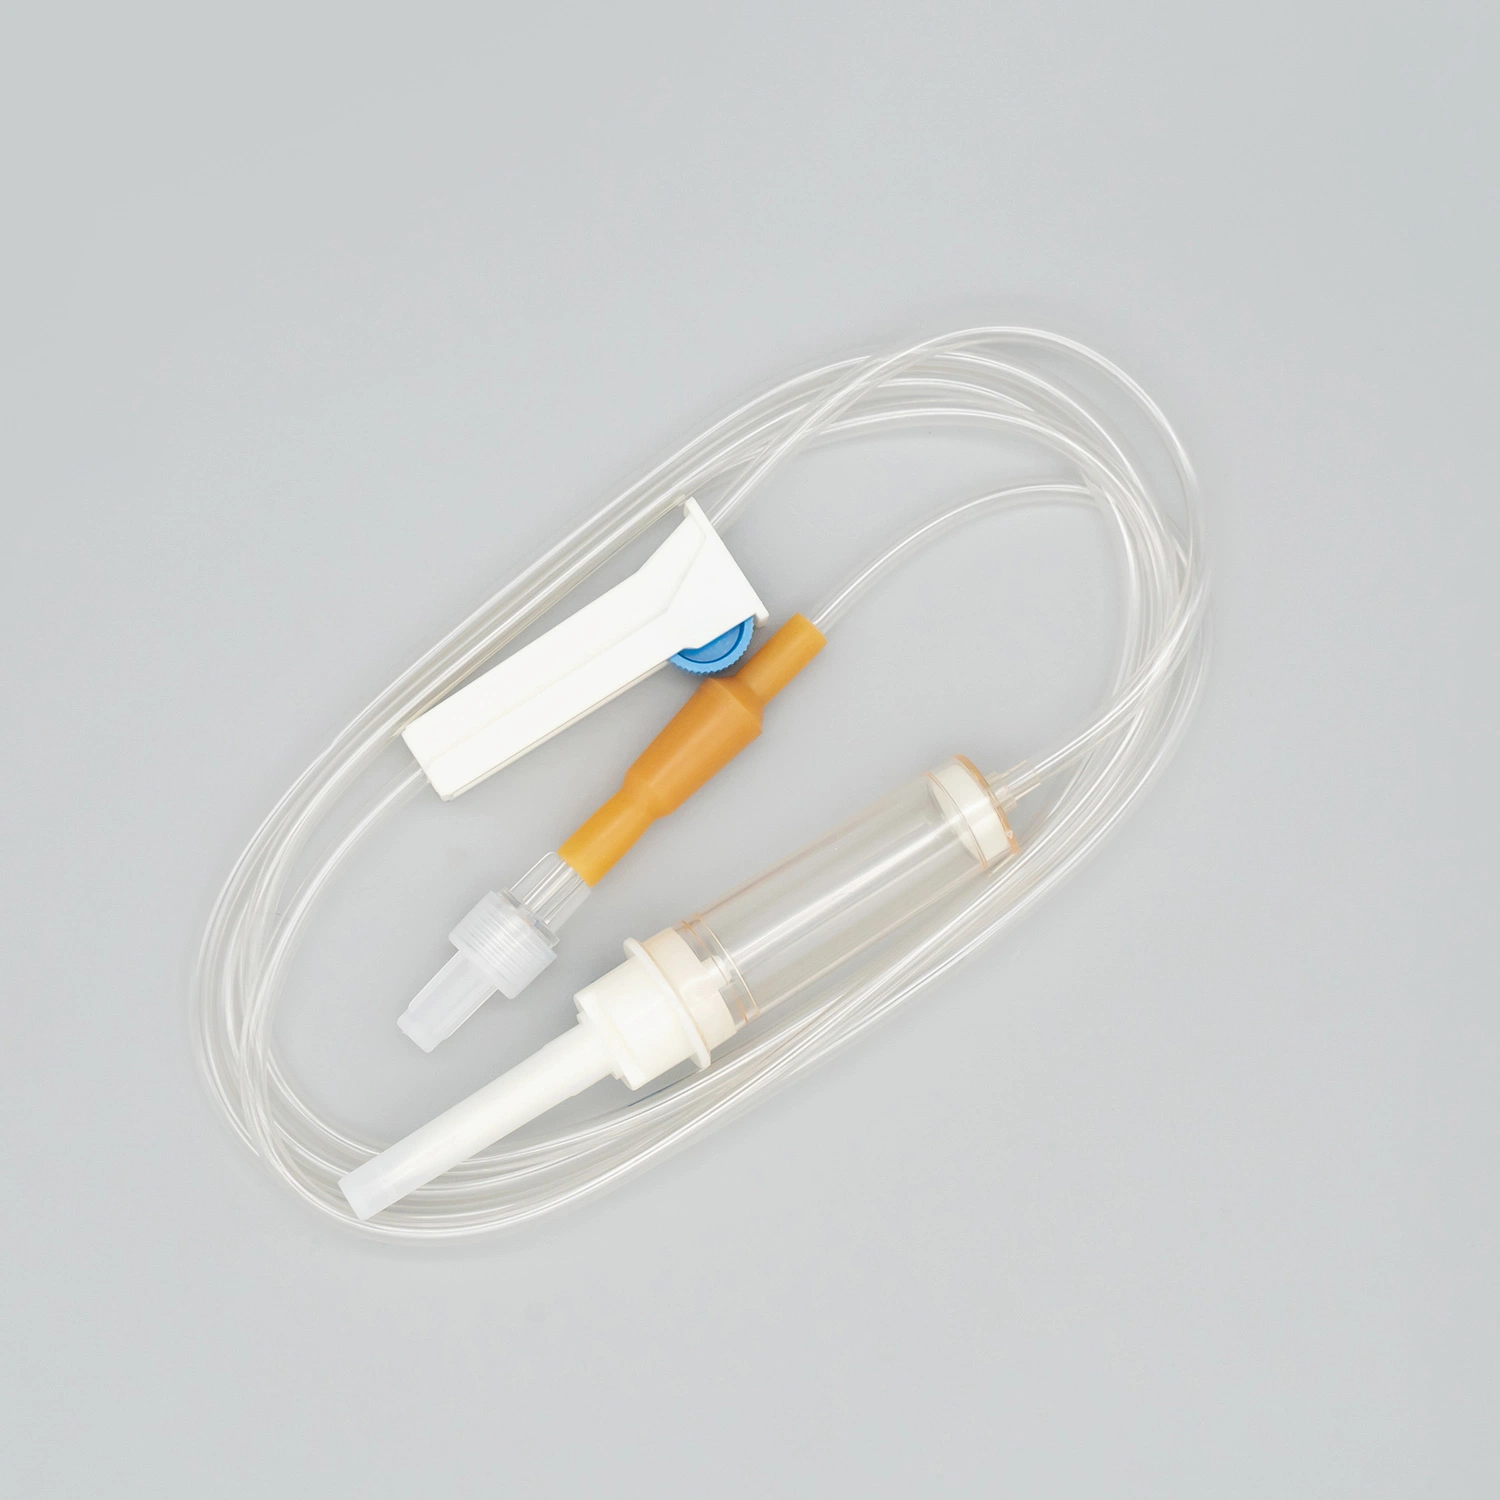 Flow Regulator OEM PE Bag and Blister Paper, 500PCS/20polybag/CTN Condom Infusion Set with Needle